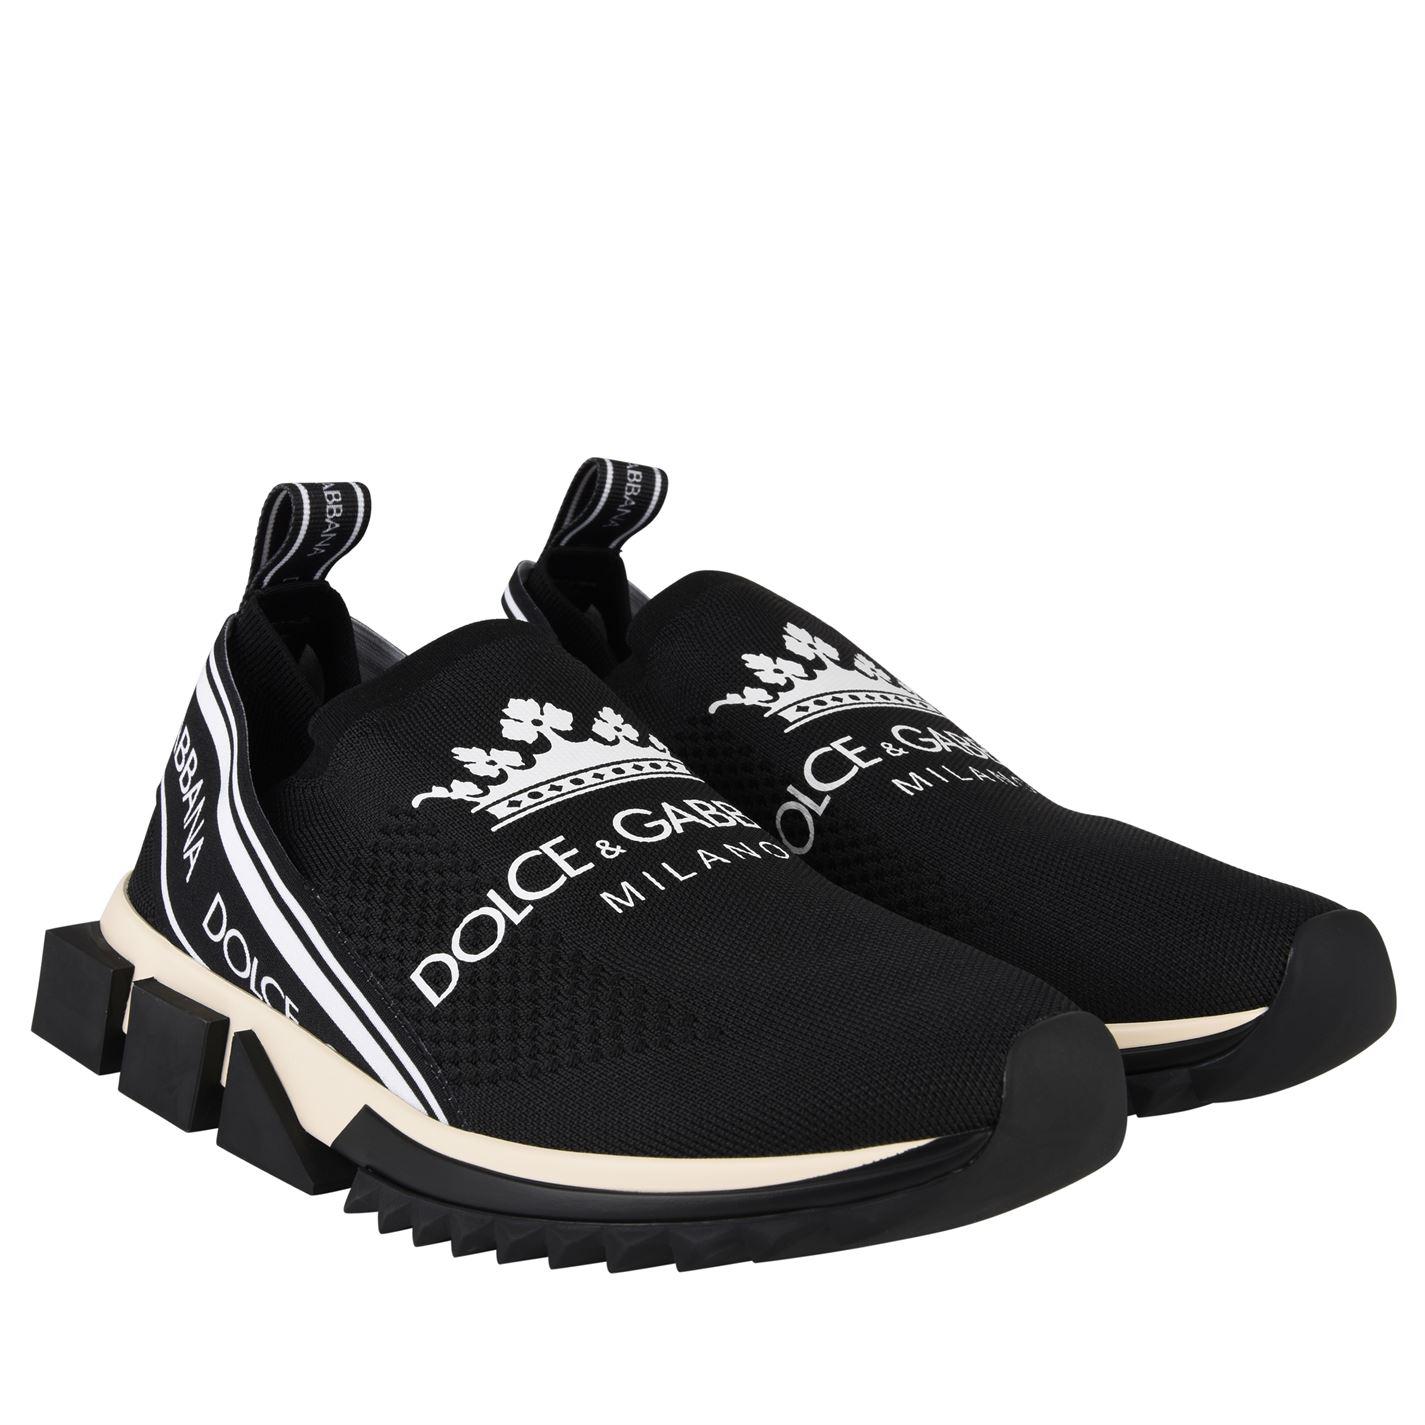 dolce and gabbana crown run trainers